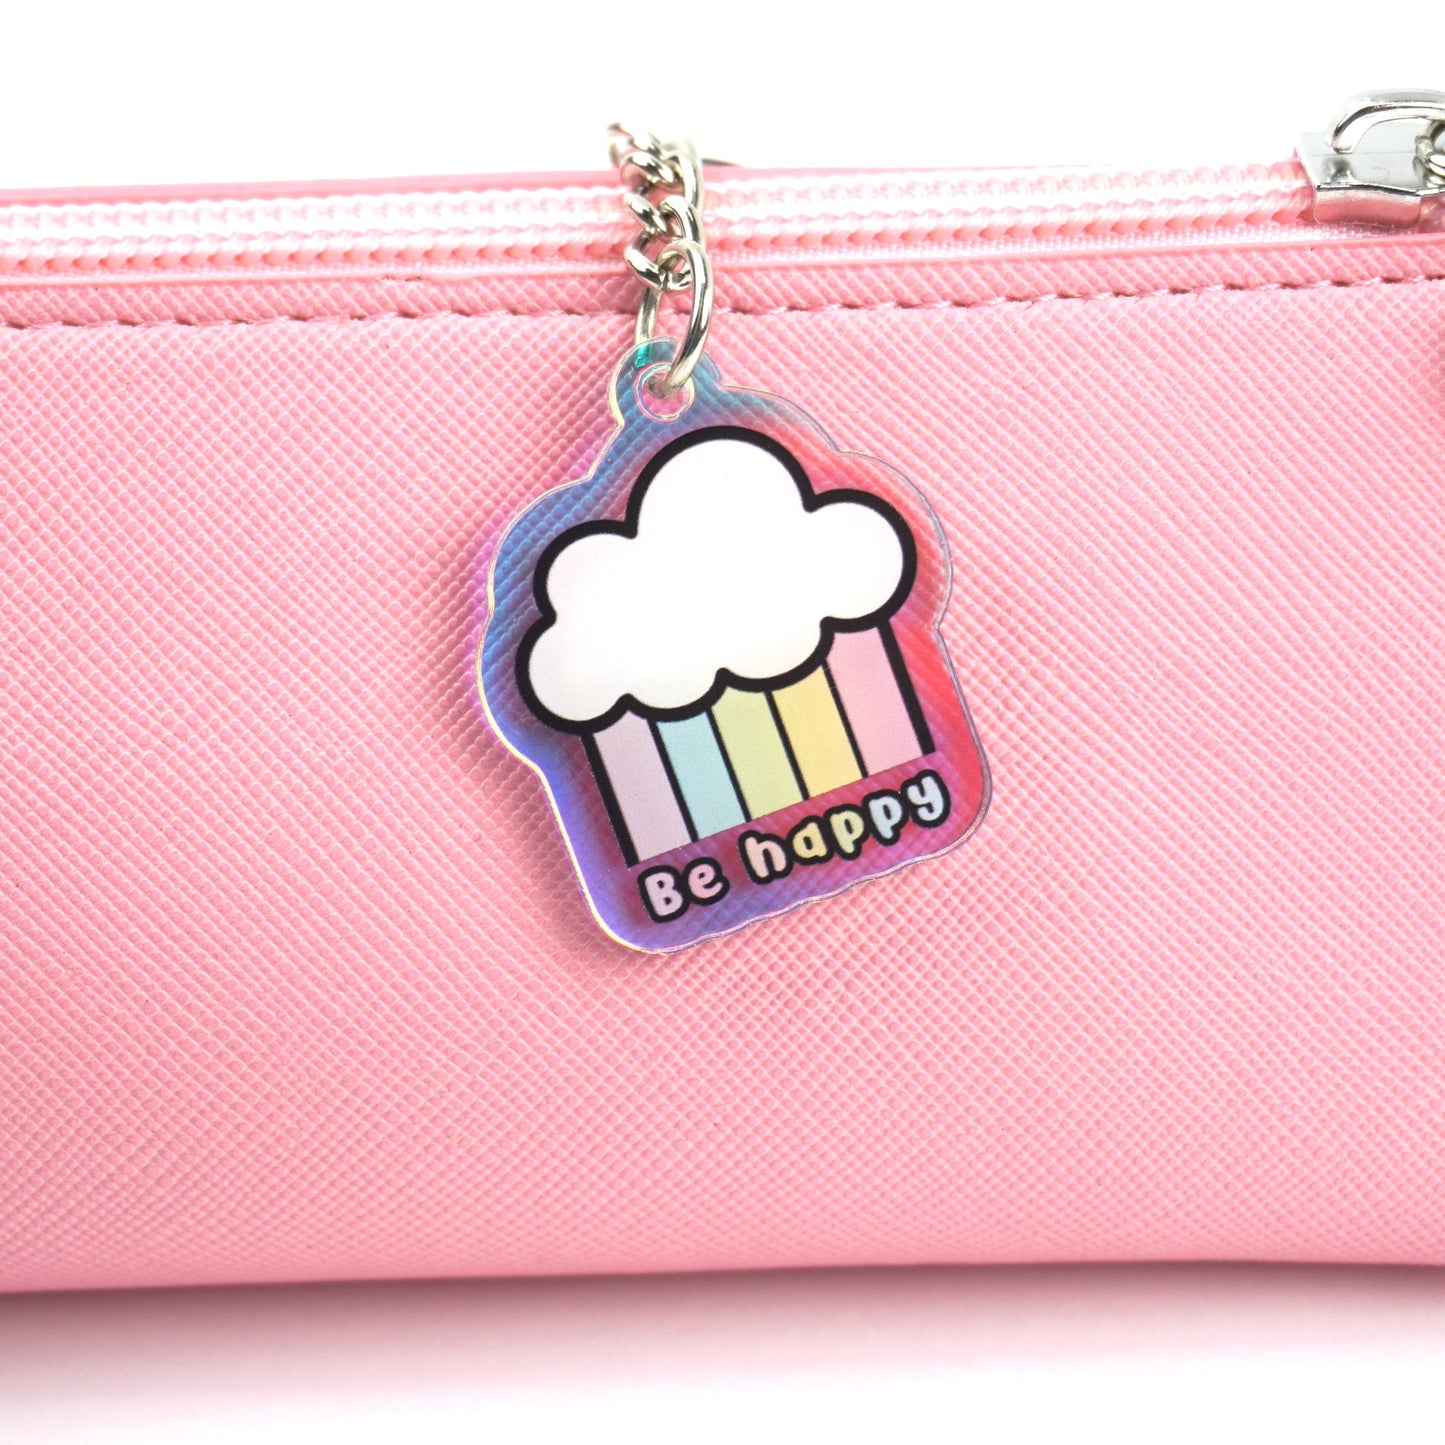 Be happy holographic keychain